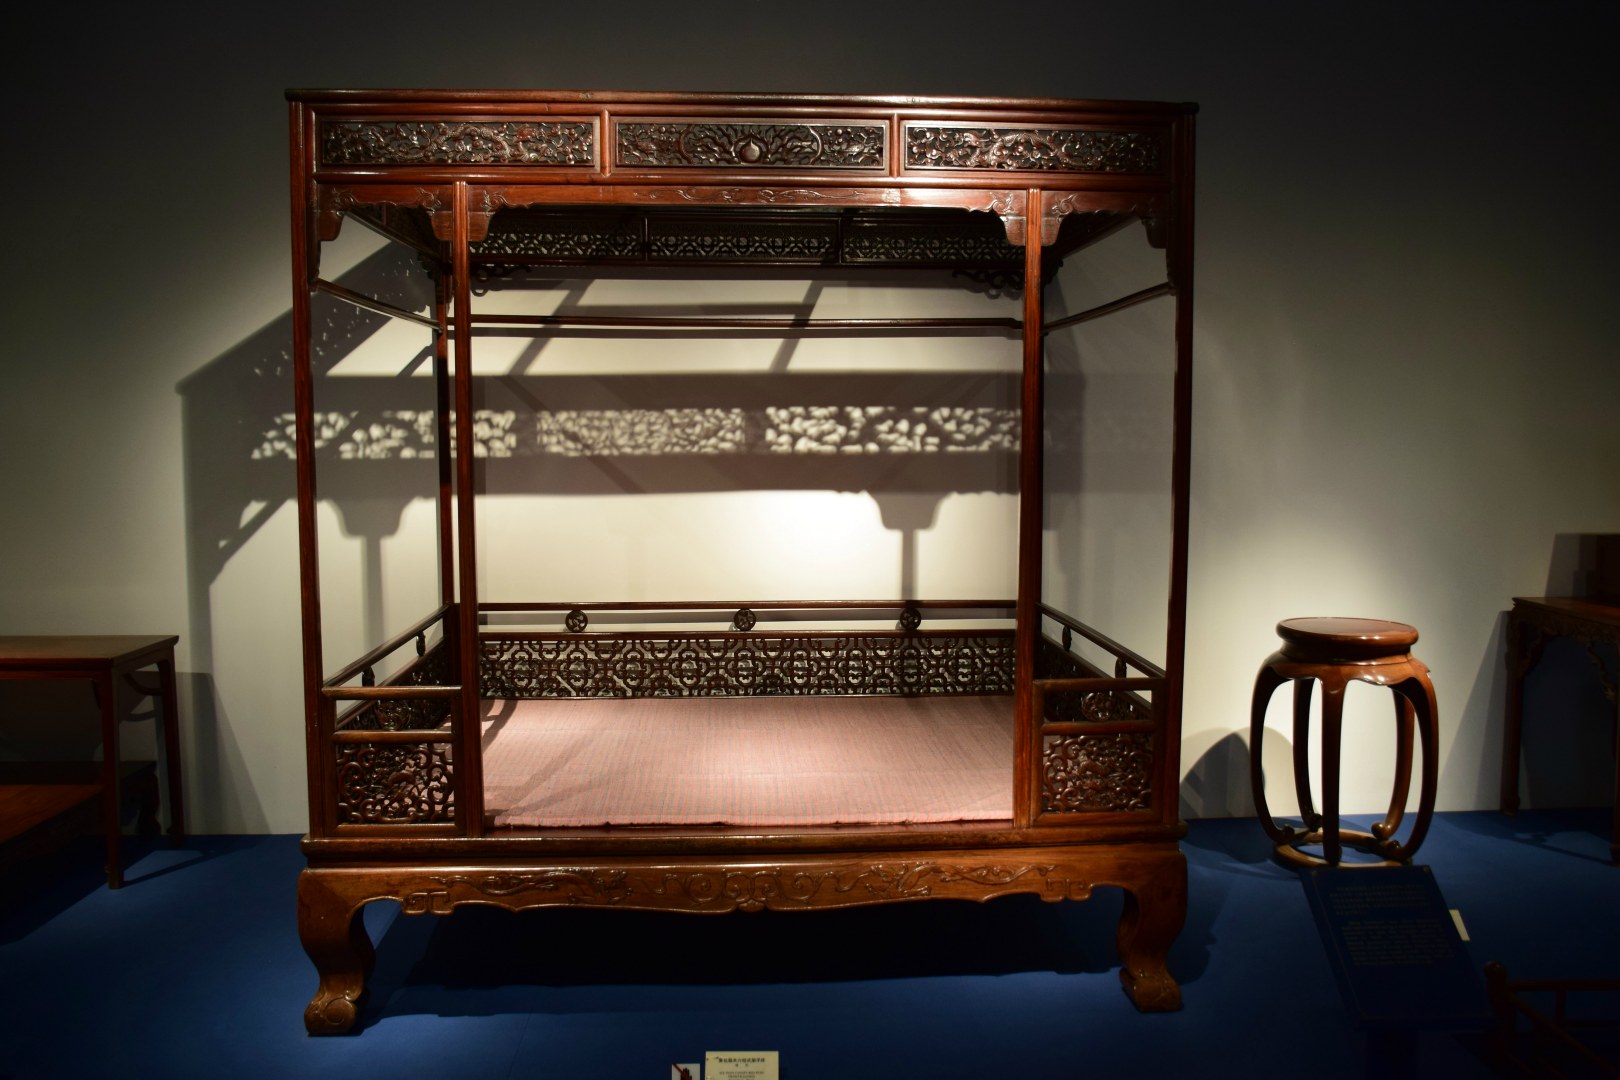 Ming Dynasty Bed, Shanghai Museum